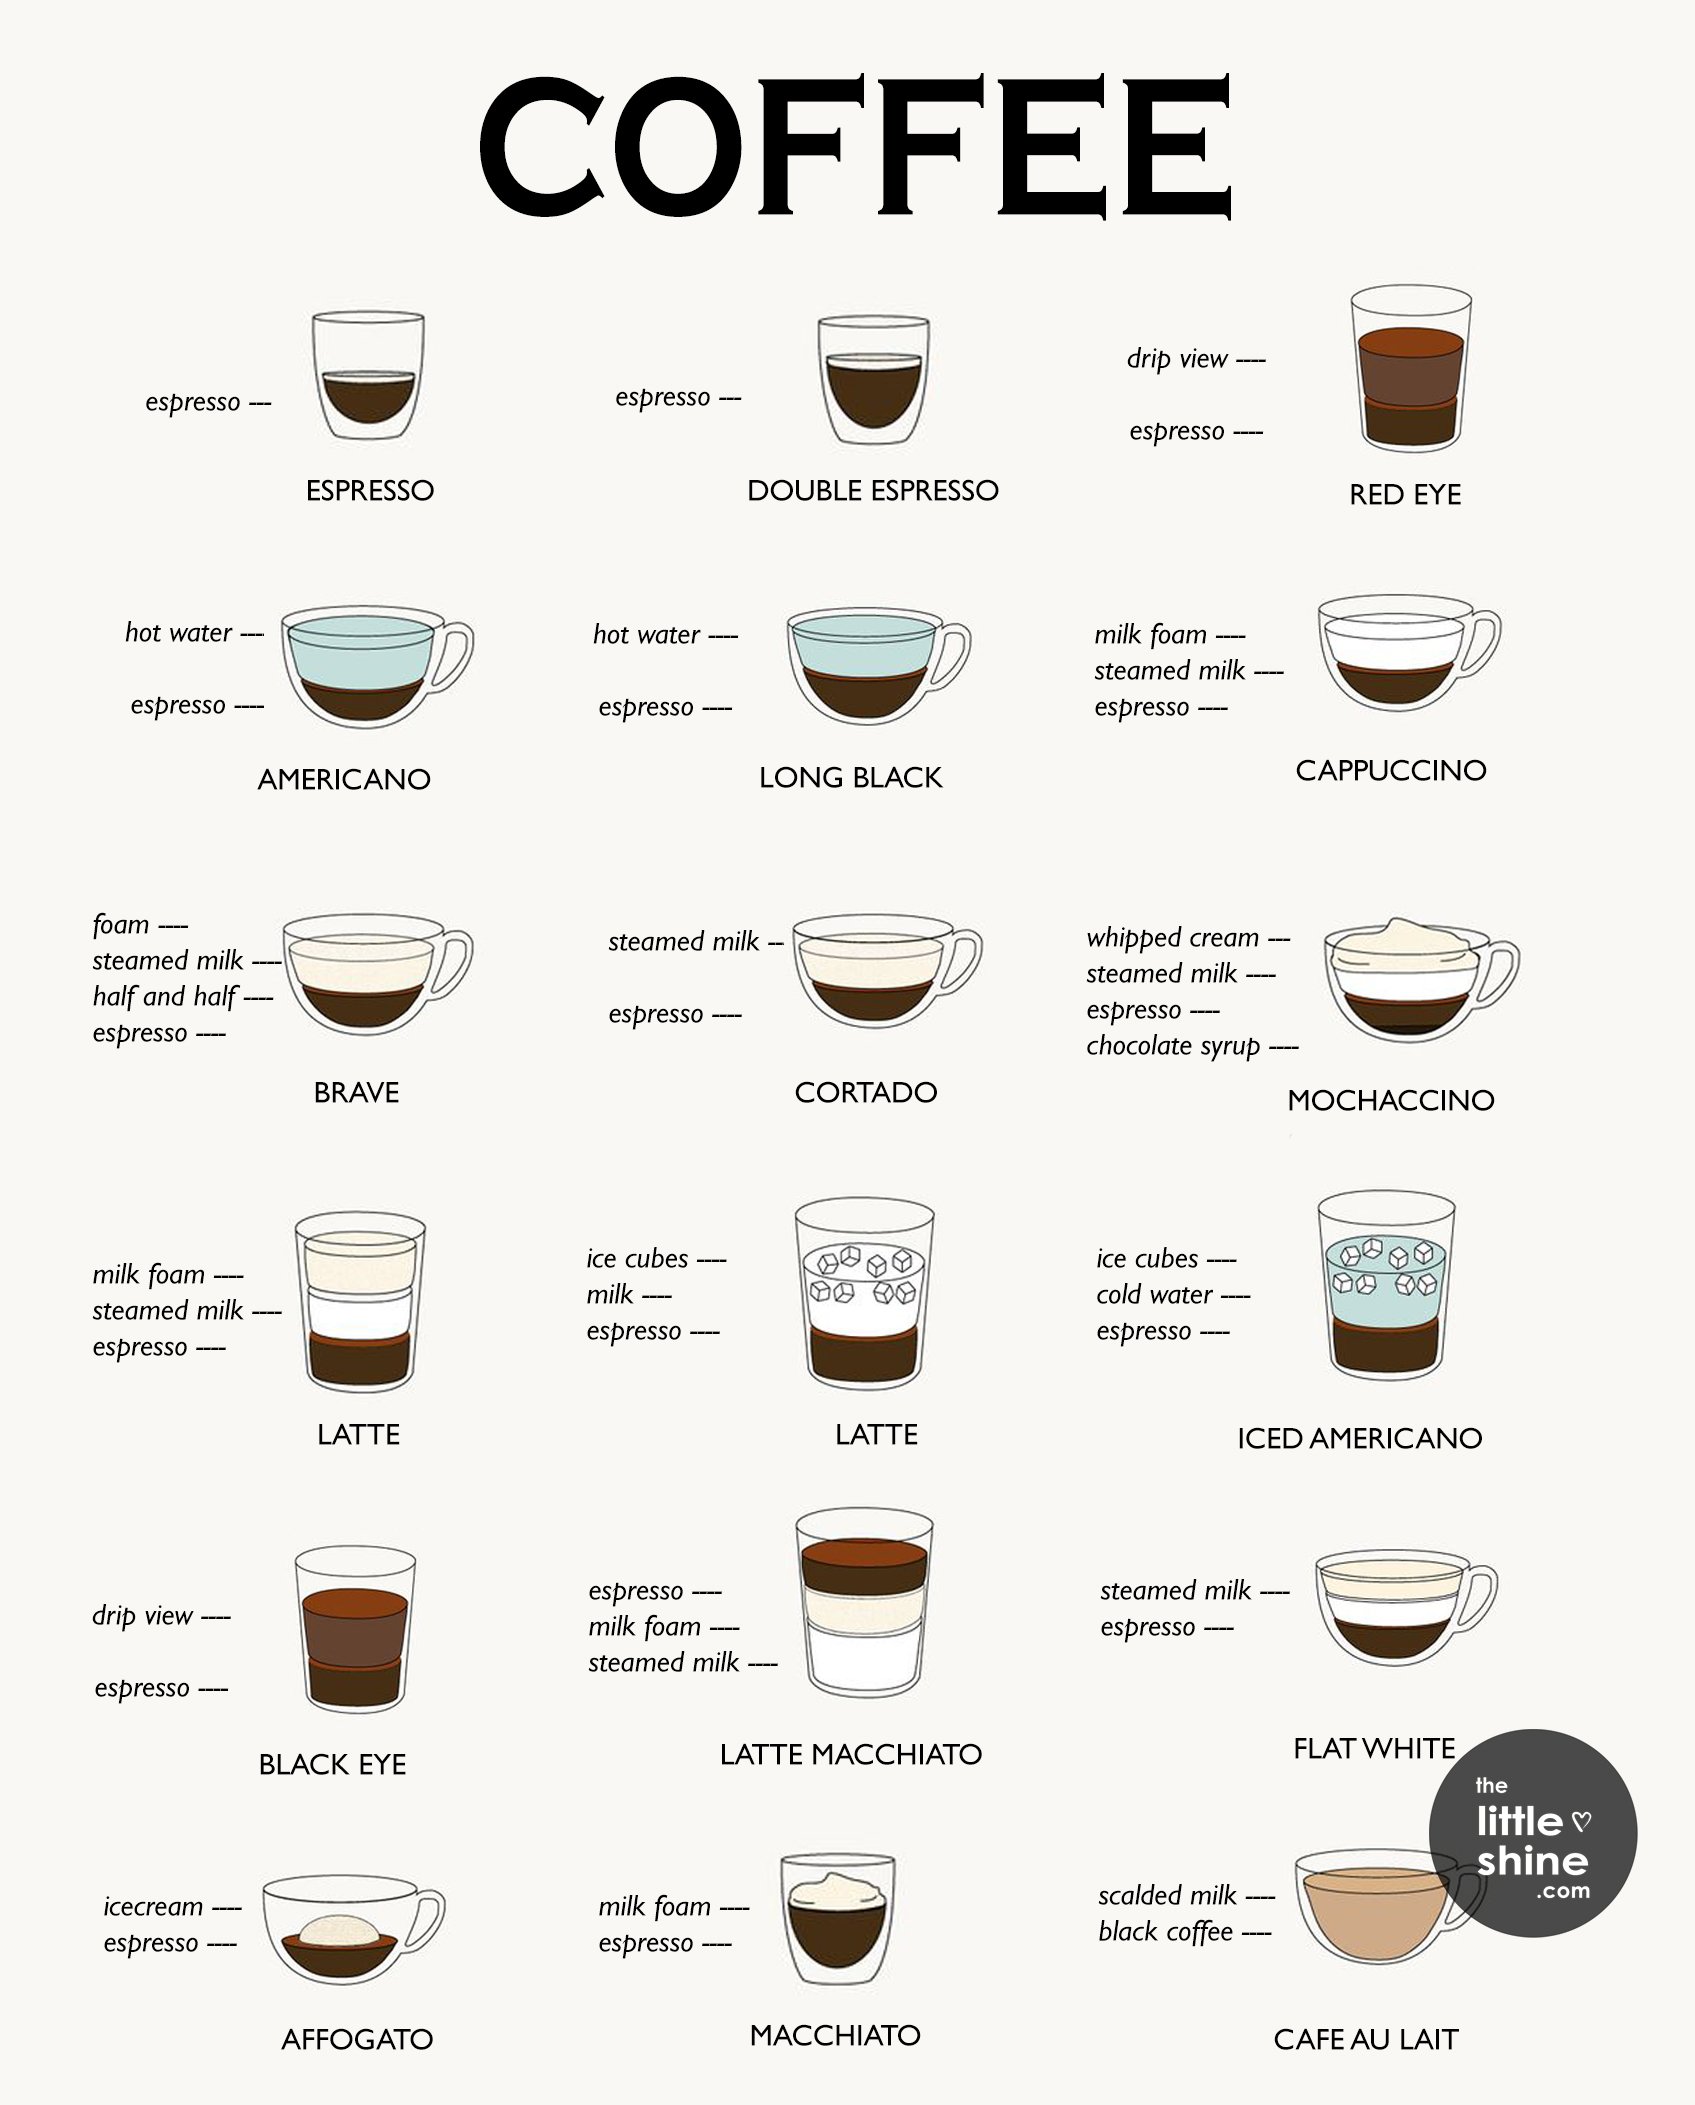 10 DIFFERENT TYPES OF COFFEE RECIPES